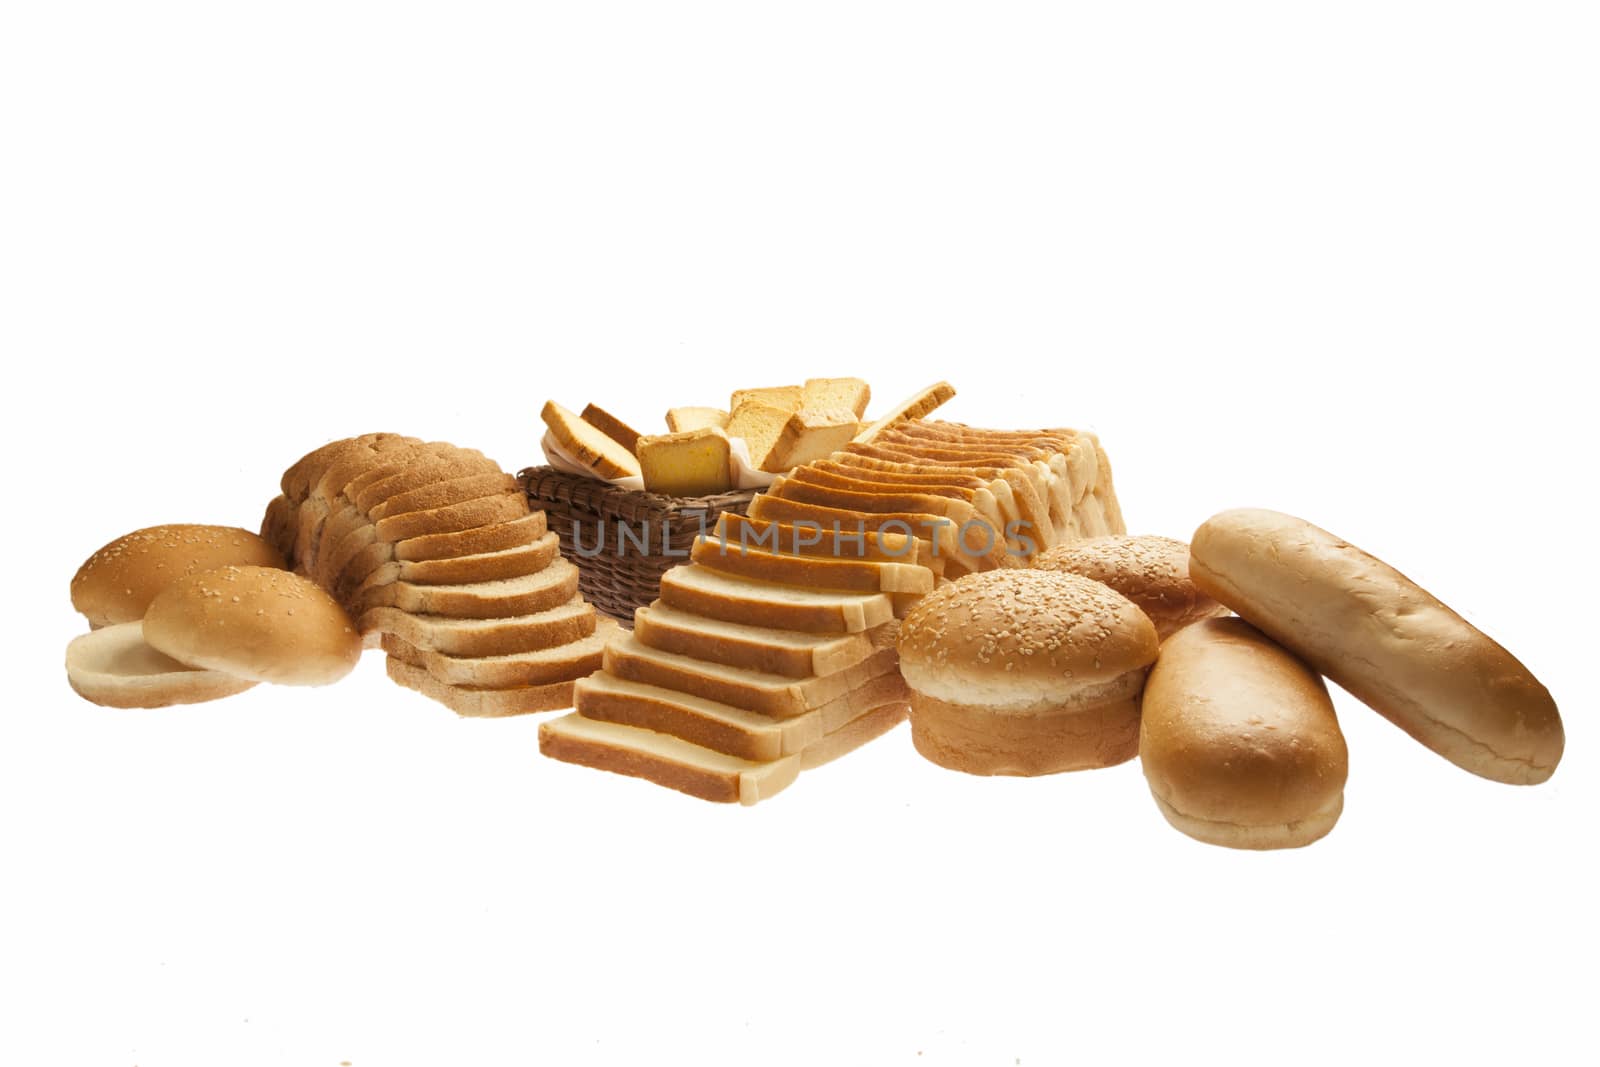 Assorted bread